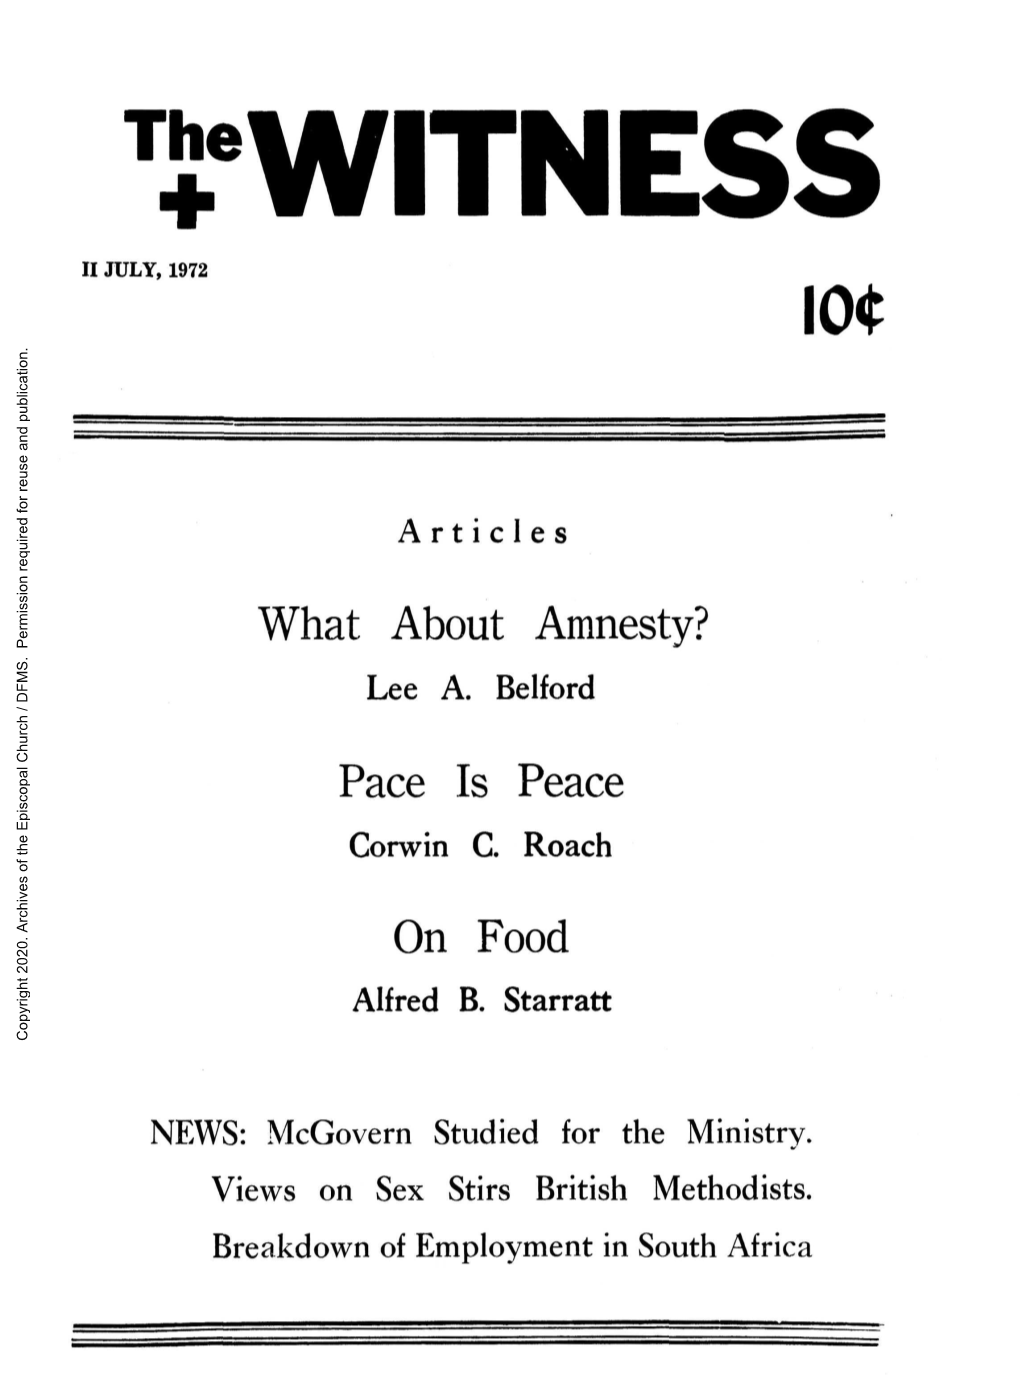 1972 the Witness, Vol. 57, No. 14